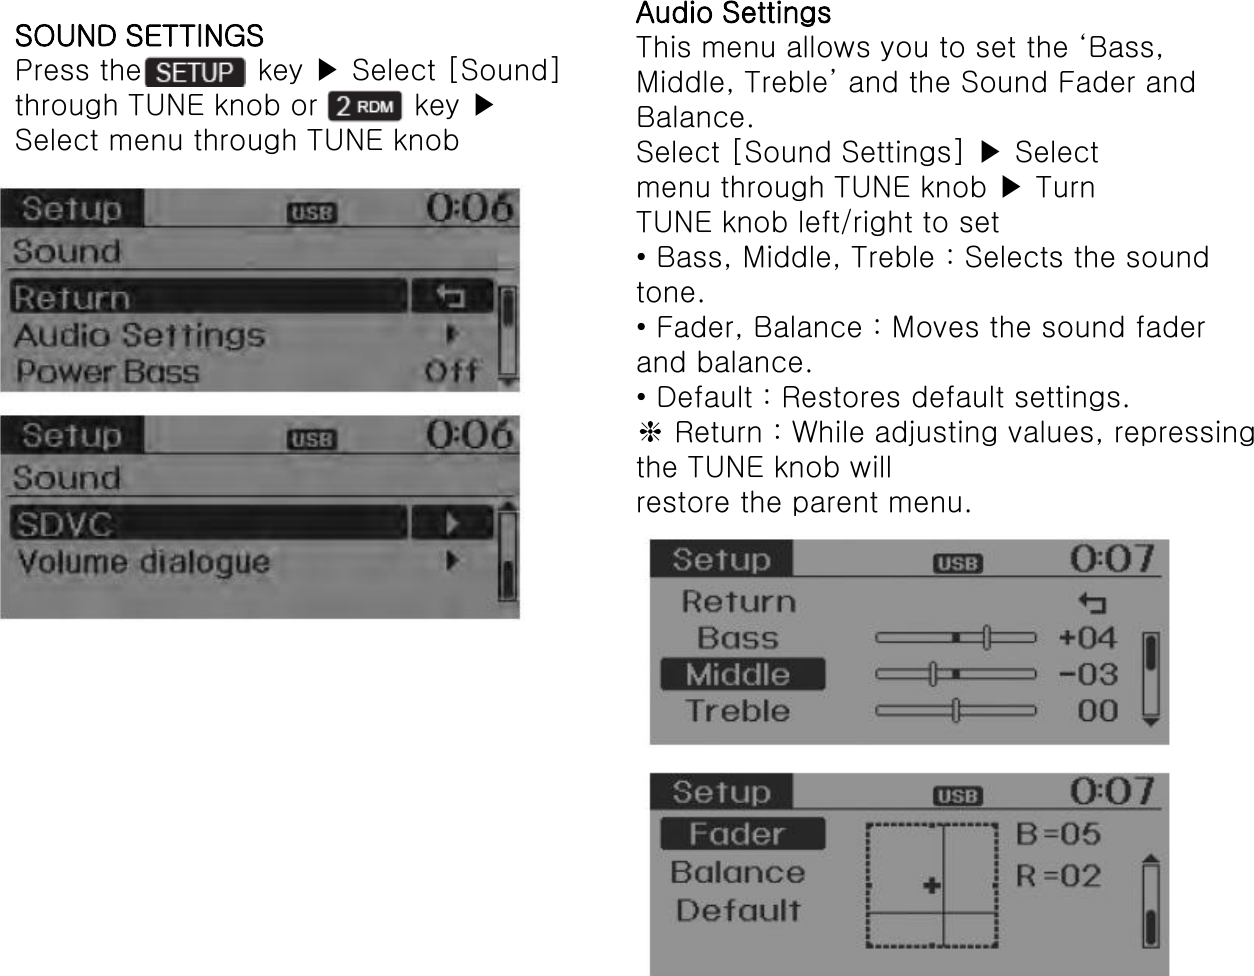 SOUND SETTINGS Press the            key ▶ Select [Sound] through TUNE knob or          key ▶ Select menu through TUNE knob Audio Settings This menu allows you to set the ‘Bass, Middle, Treble’ and the Sound Fader and Balance. Select [Sound Settings] ▶ Select menu through TUNE knob ▶ Turn TUNE knob left/right to set • Bass, Middle, Treble : Selects the sound tone. • Fader, Balance : Moves the sound fader and balance. • Default : Restores default settings. ❈ Return : While adjusting values, repressing the TUNE knob will restore the parent menu. 